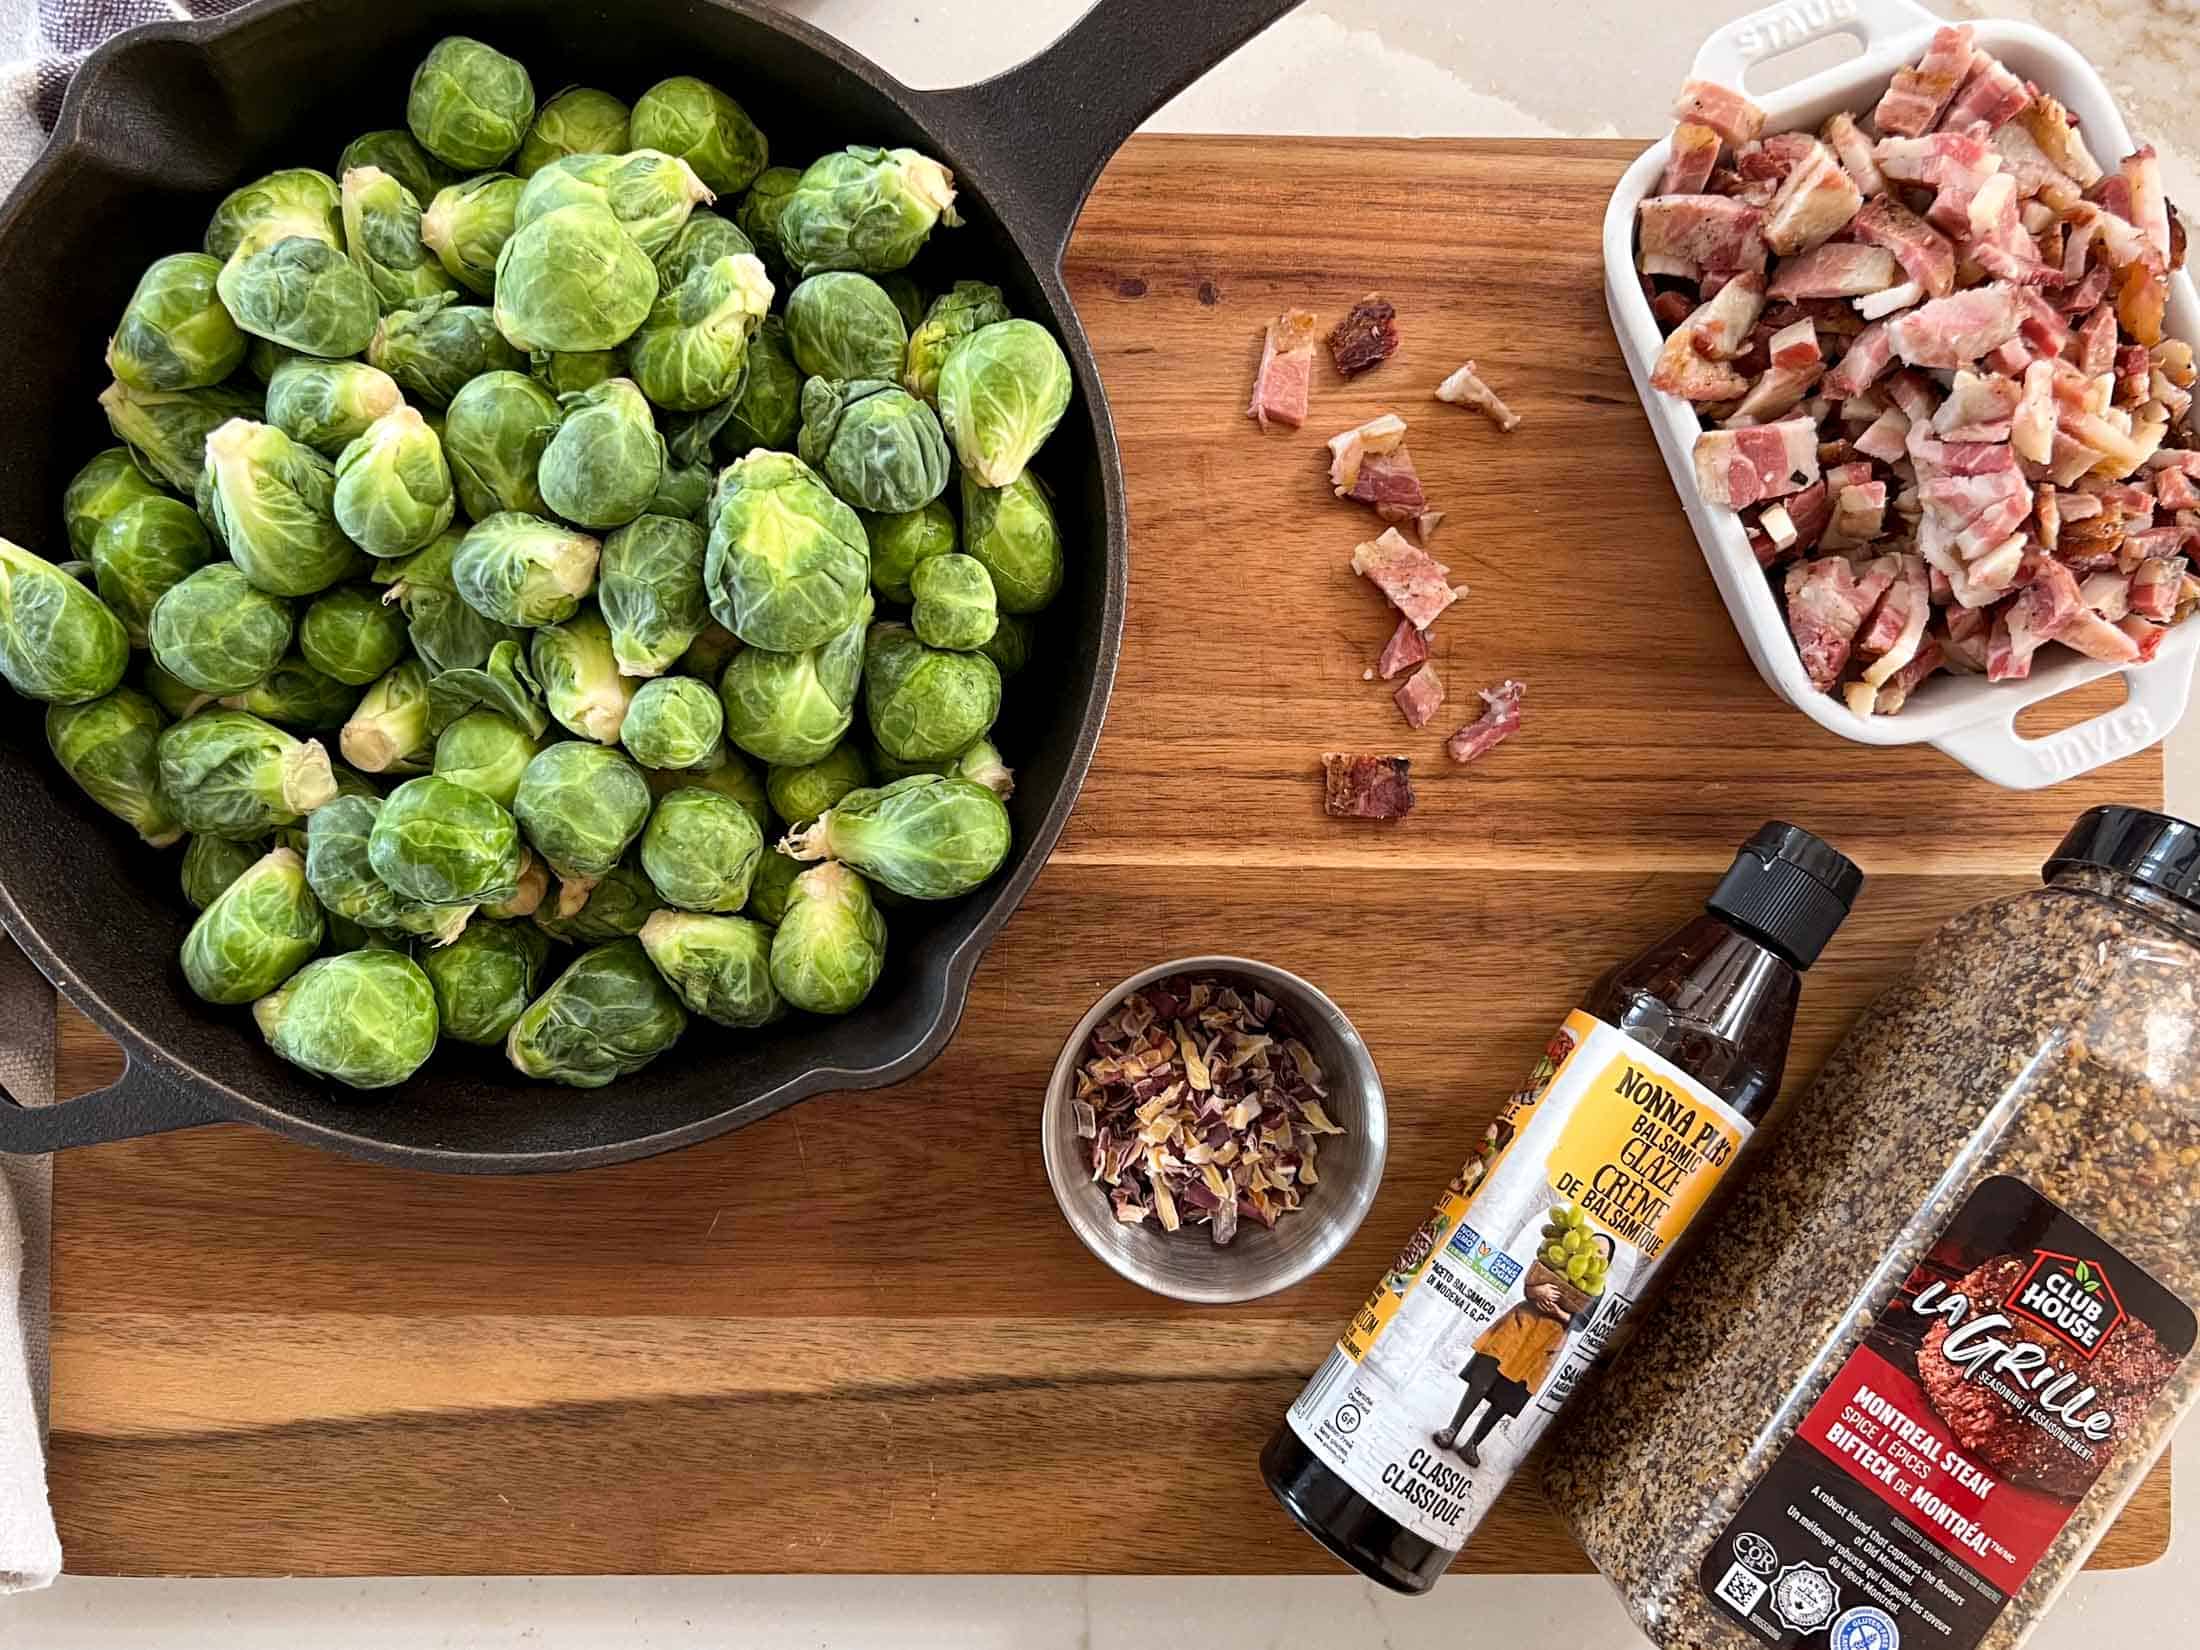 Raw brussel sprouts in a cast iron skillet, cooked bacon, dried onions, balsamic glaze and montreal steak spice.